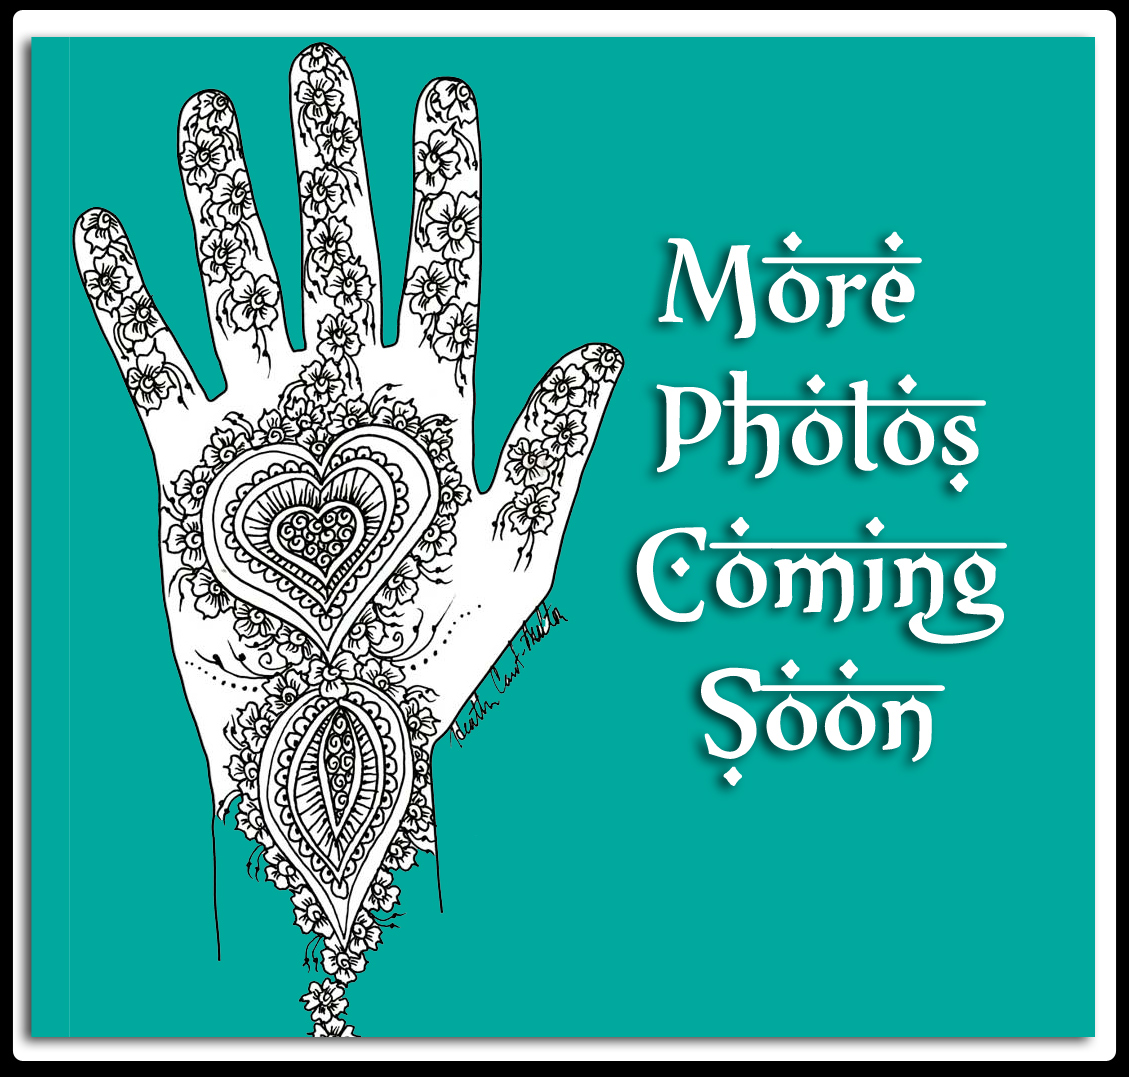 More henna photos coming soon! Thanks for your patience while we rebuild our new website at www.HennaByHeather.com